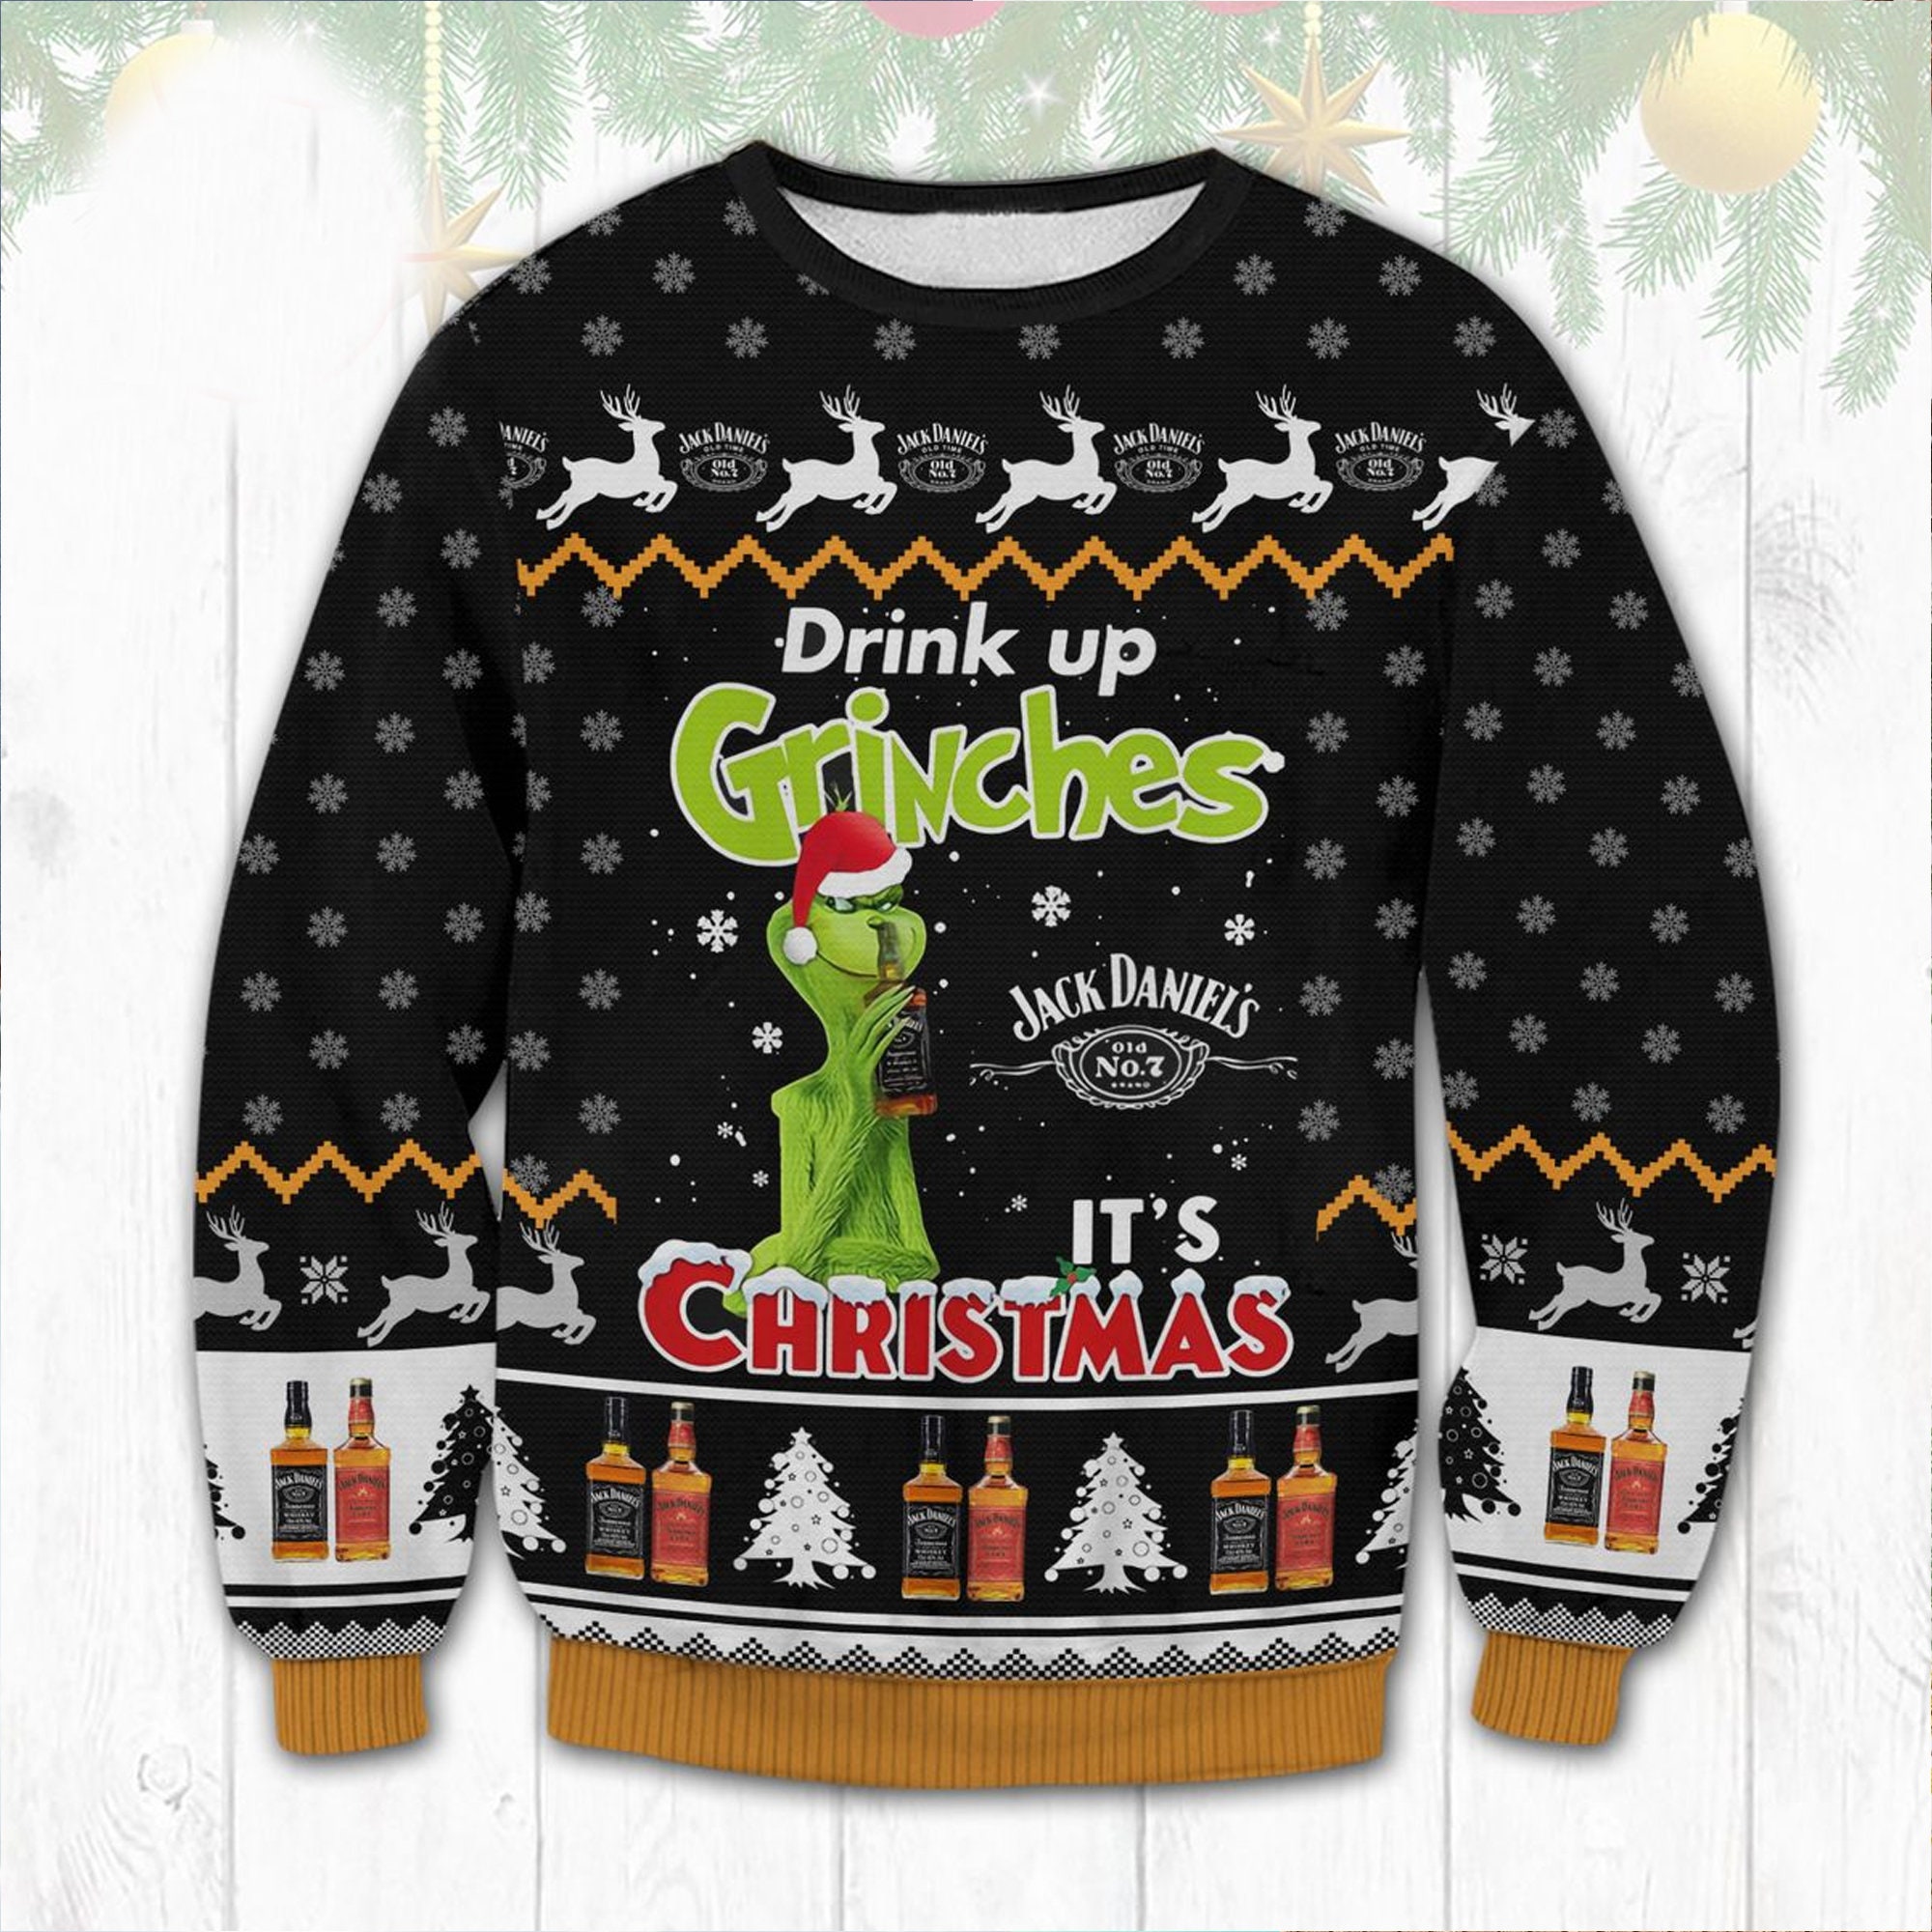 3D Jack Daniel’s Drink up Grinch Ugly Christmas Sweater, Grinch Funny Sweater, Grinch Christmas sweater, Christmas Gifts for her for him